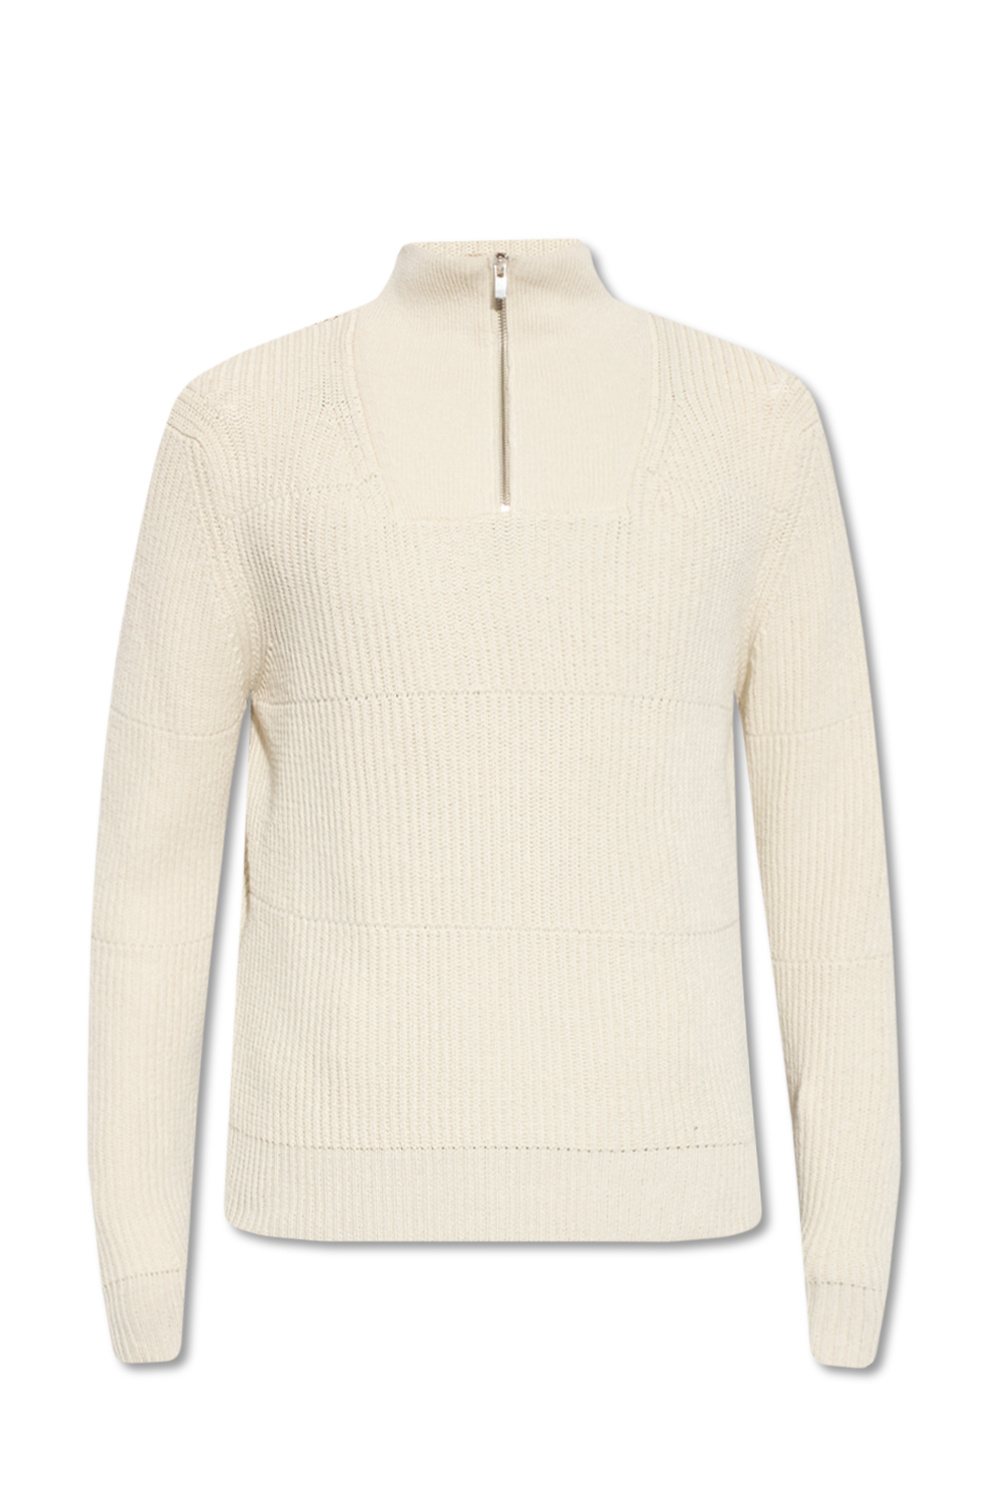 Jacquemus ‘Doce’ sweater Strass with standing collar